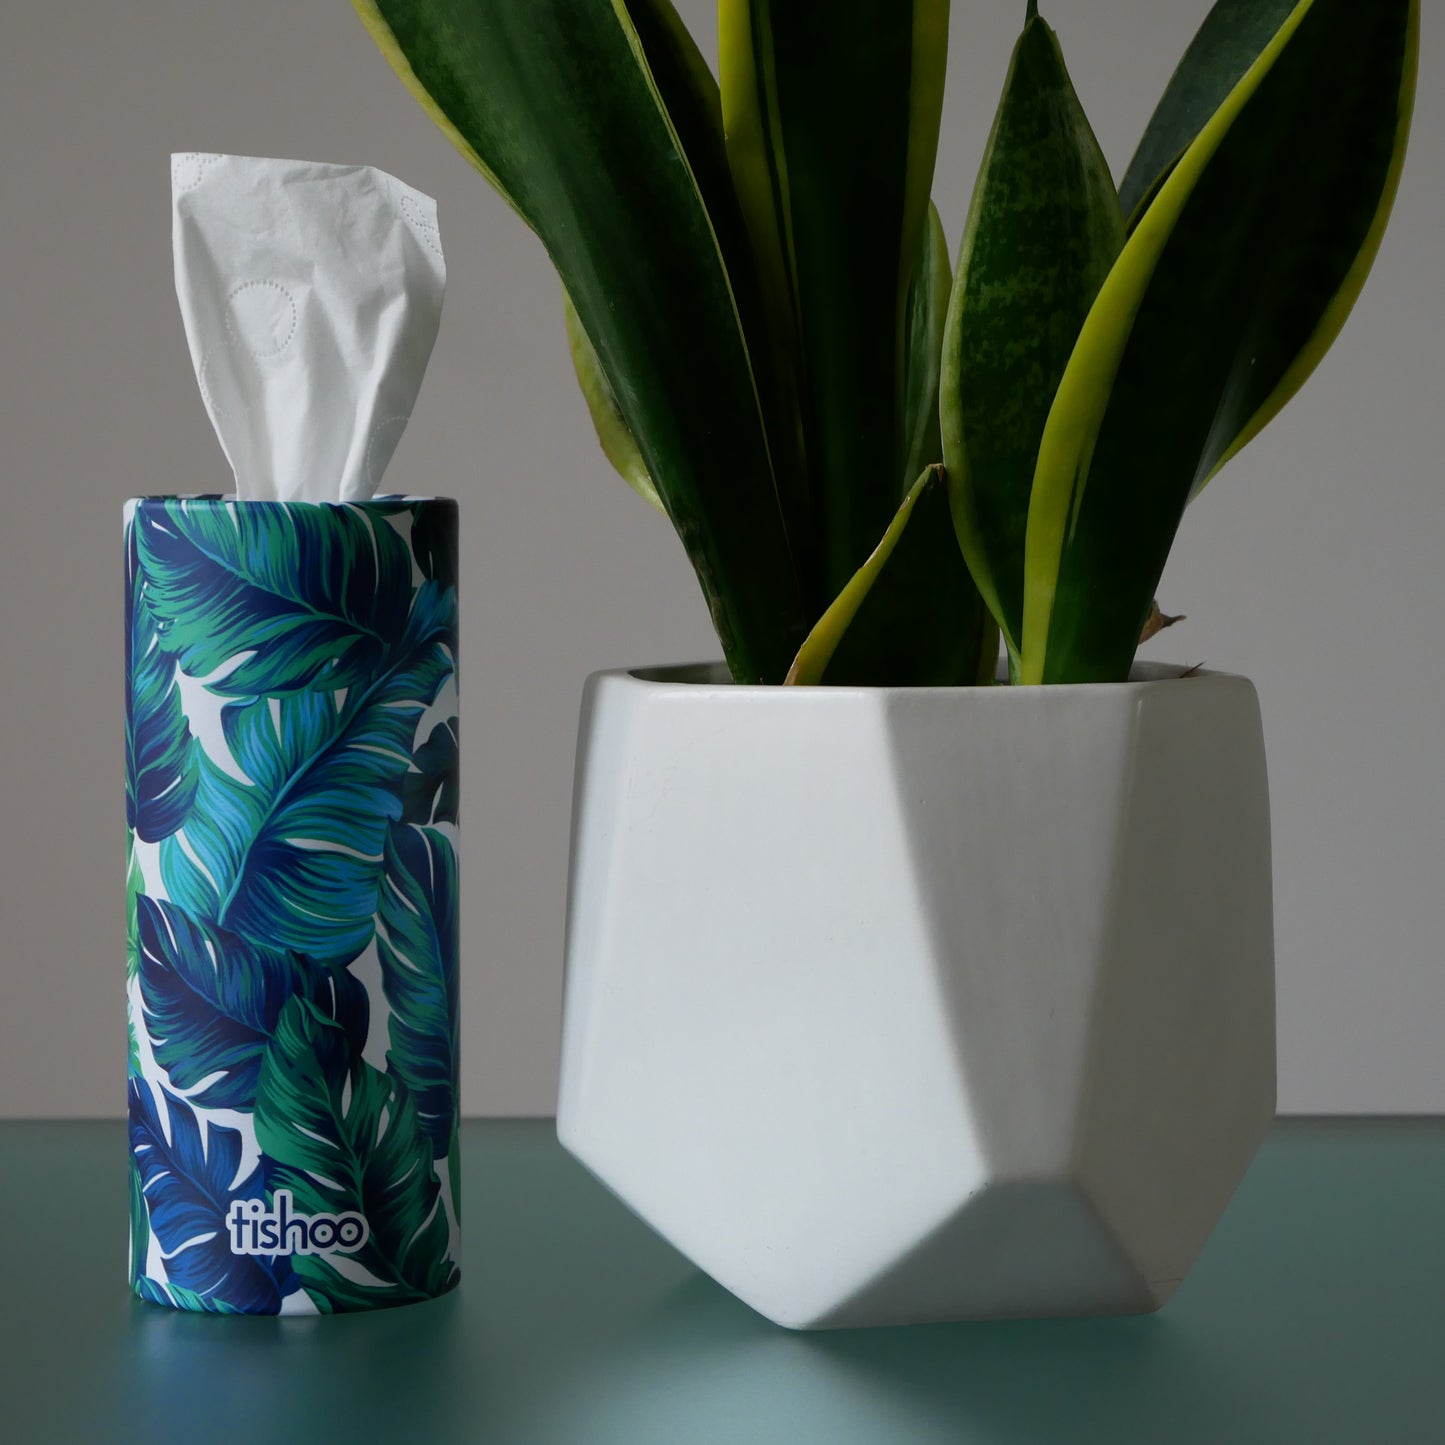 tishoo Luxury Tissues Green/Leaves design on table next to plant